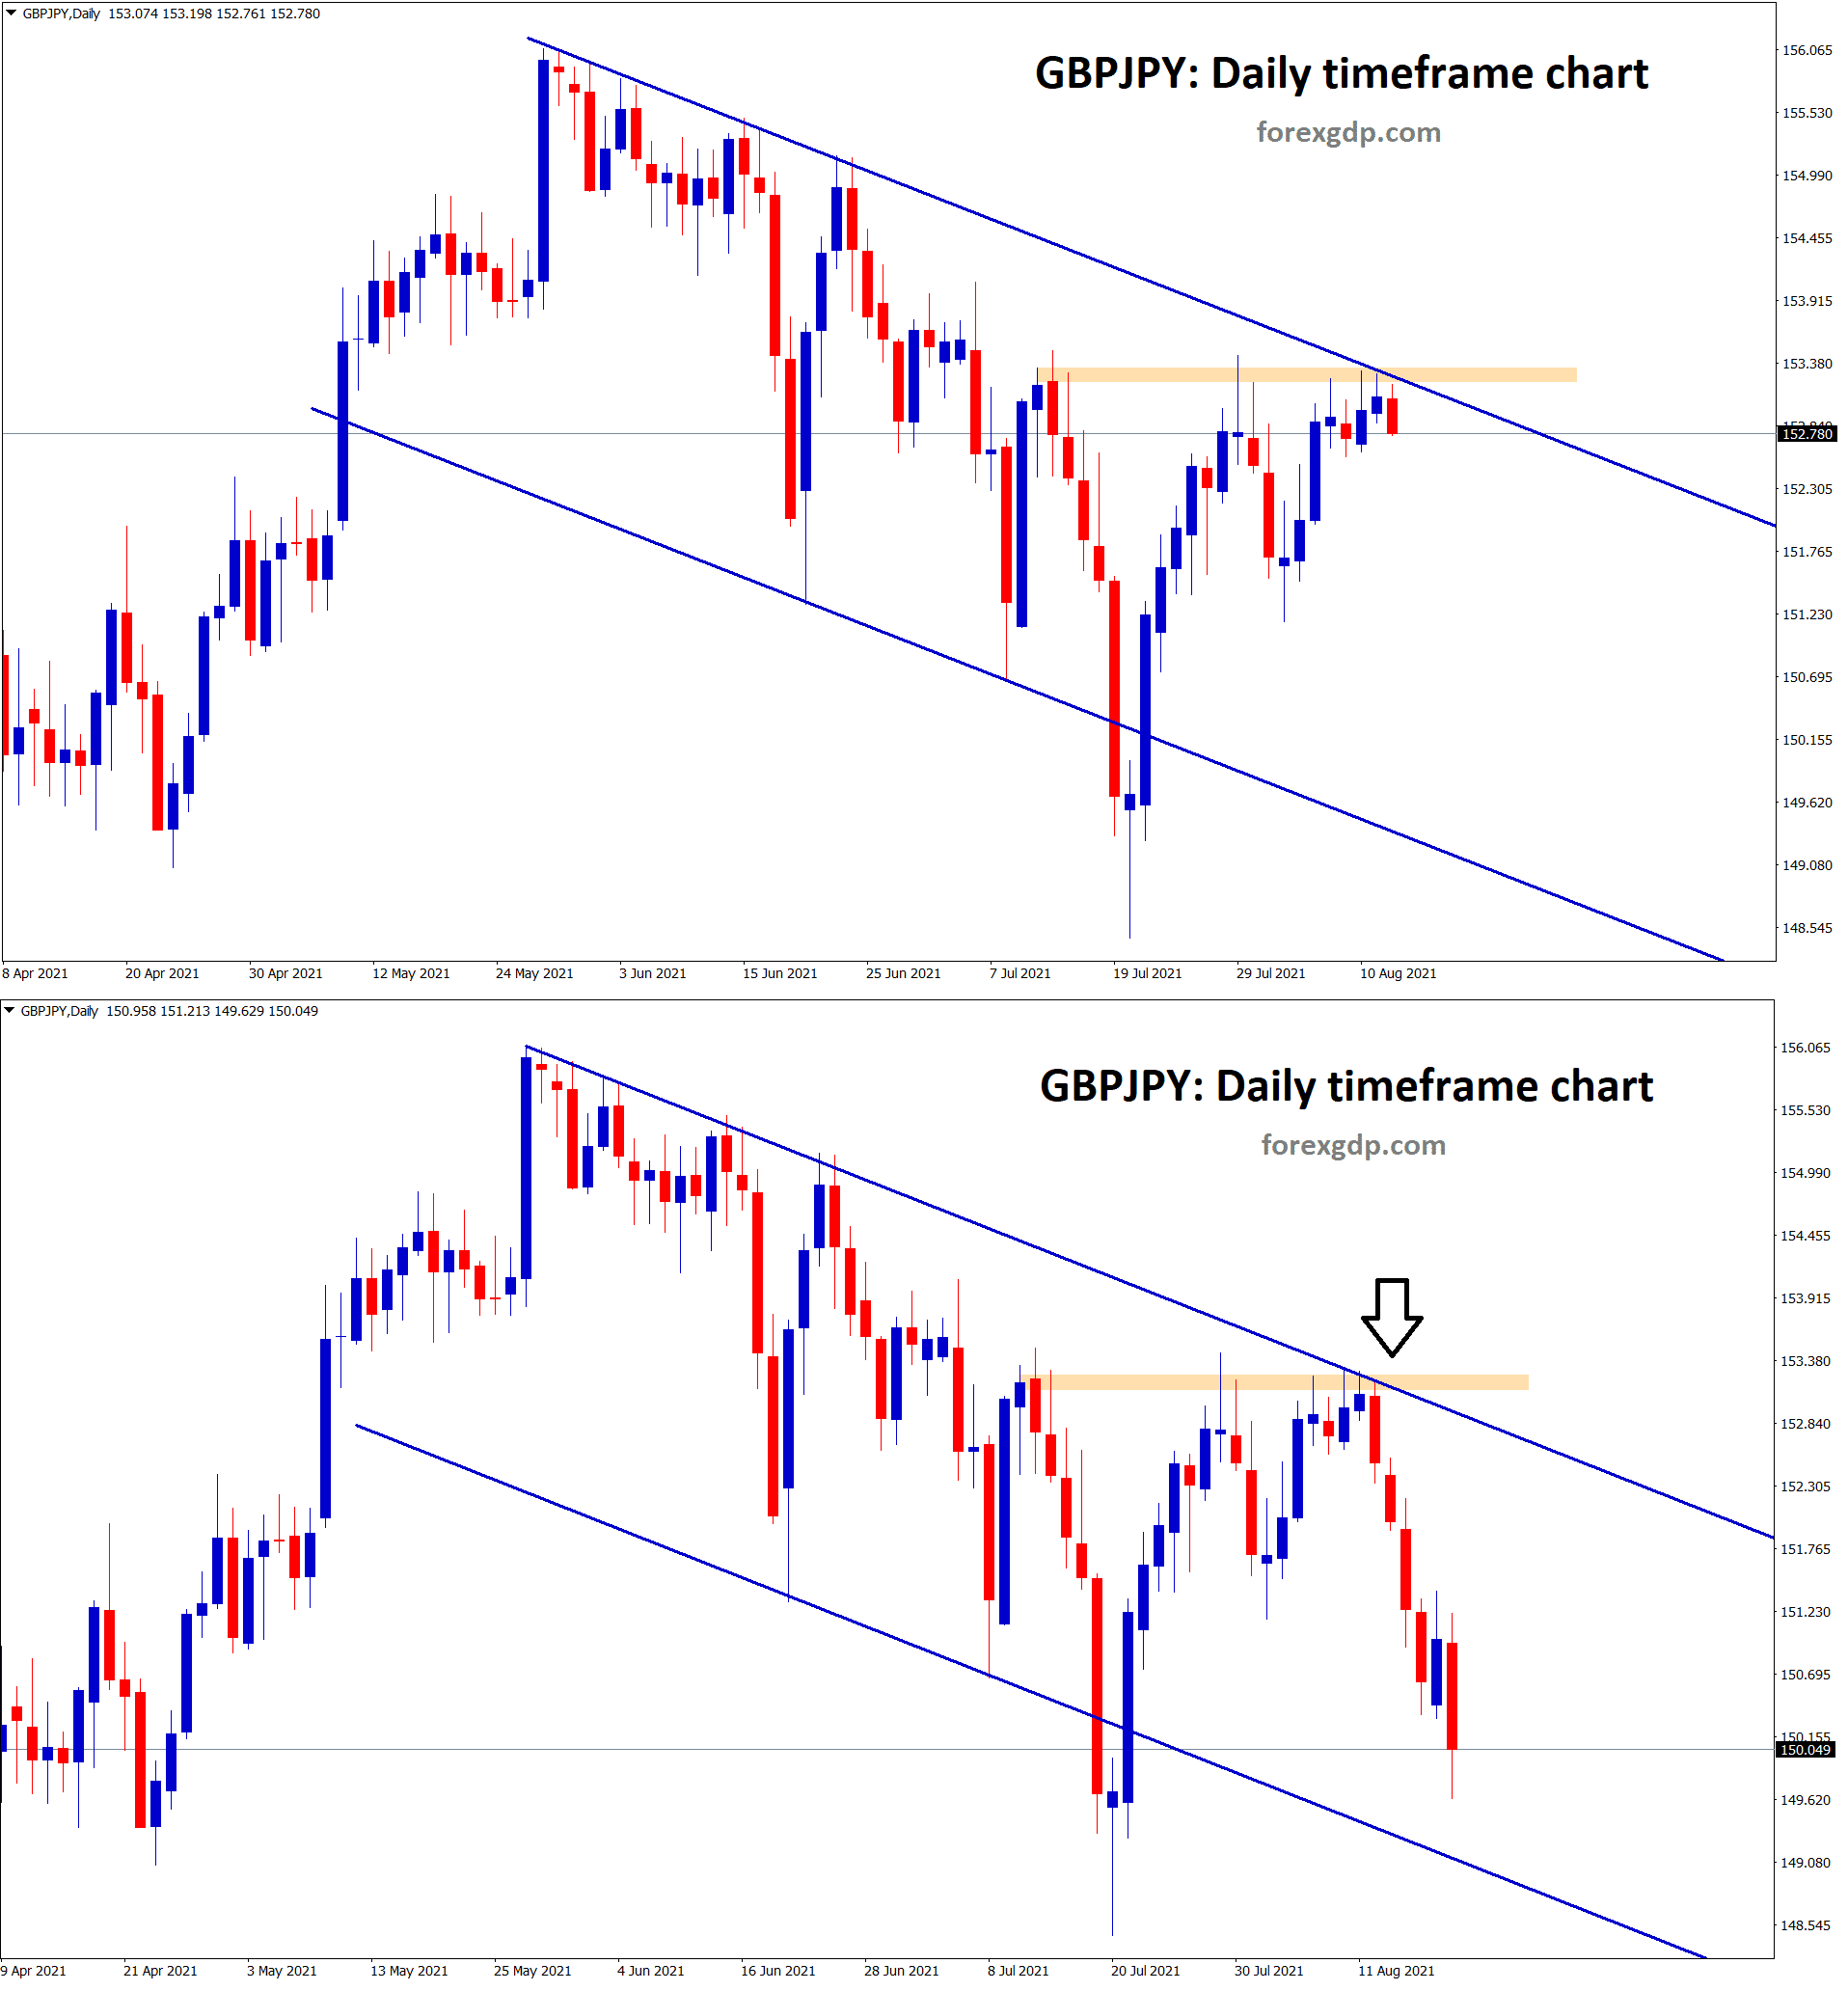 GBPJPY has fallen from the horizontal resistance and lower high zone of the descending